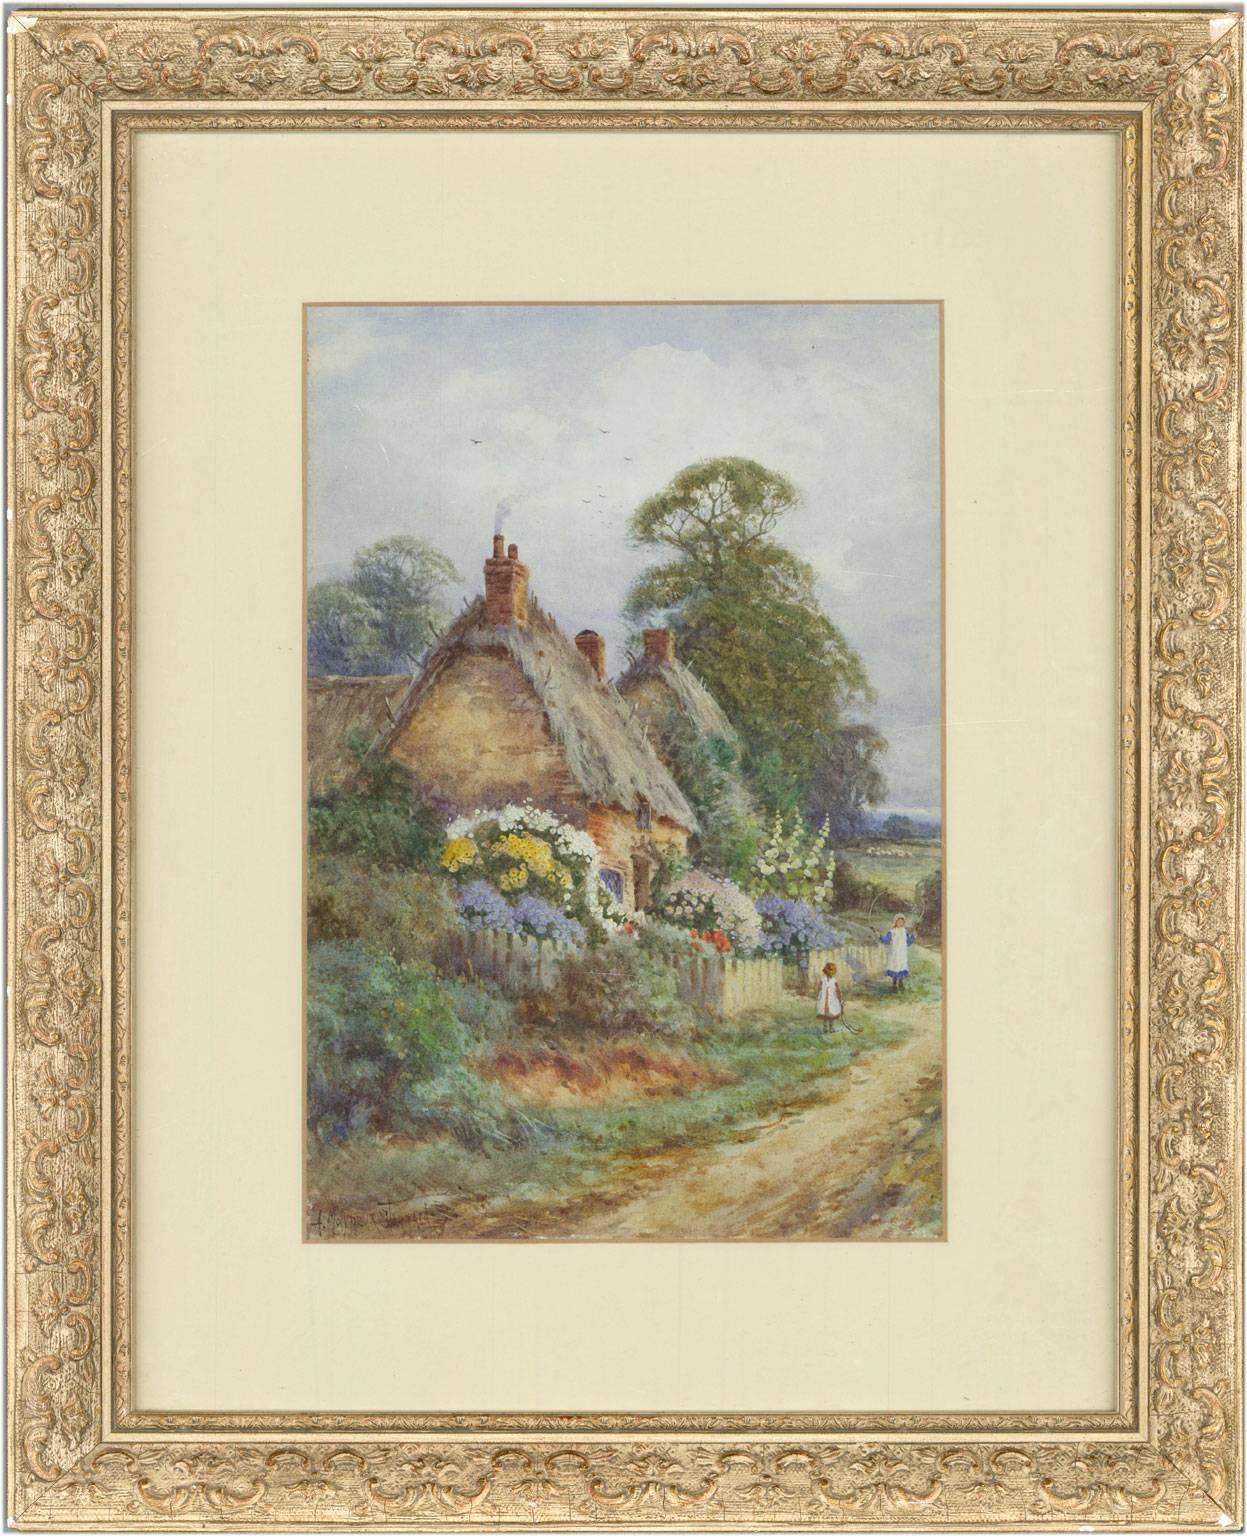 A fine early 20th Century signed English watercolour depicting children by a cottage, but the well listed English artist Alexander Molyneux Stannard (1878-1975). Signed by the artist to the lower left and well presented in a cream card mount and